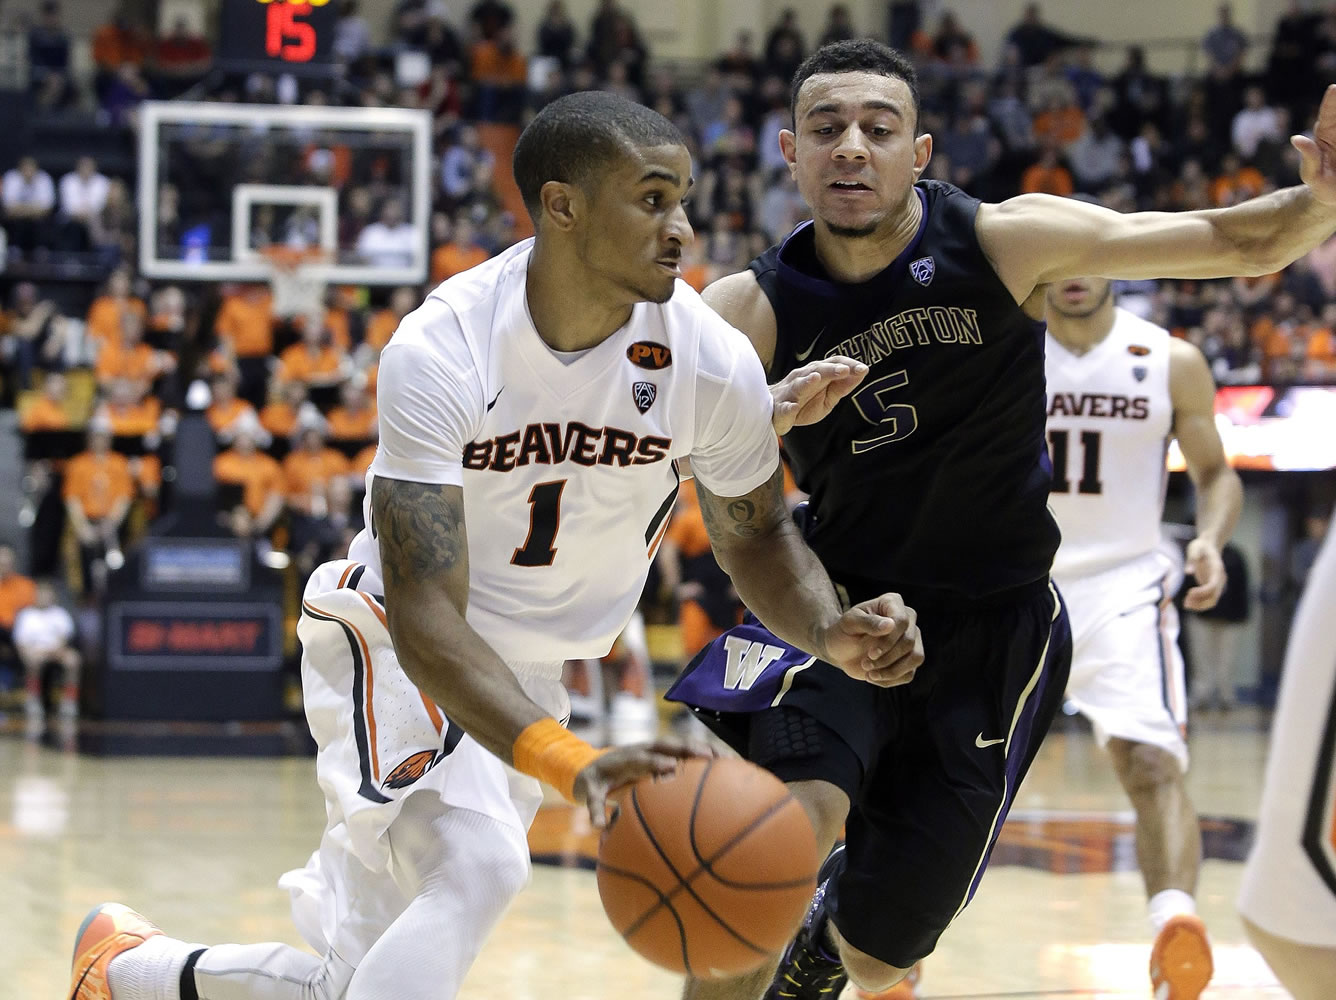 Oregon State guard Gary Payton II, left, drives on Washington guard Nigel Williams-Goss during the second half  in Corvallis, Ore., Sunday, Feb. 8, 2015. Payton led Oregon State in scoring with 17 points as they defeated Washington 64-50.